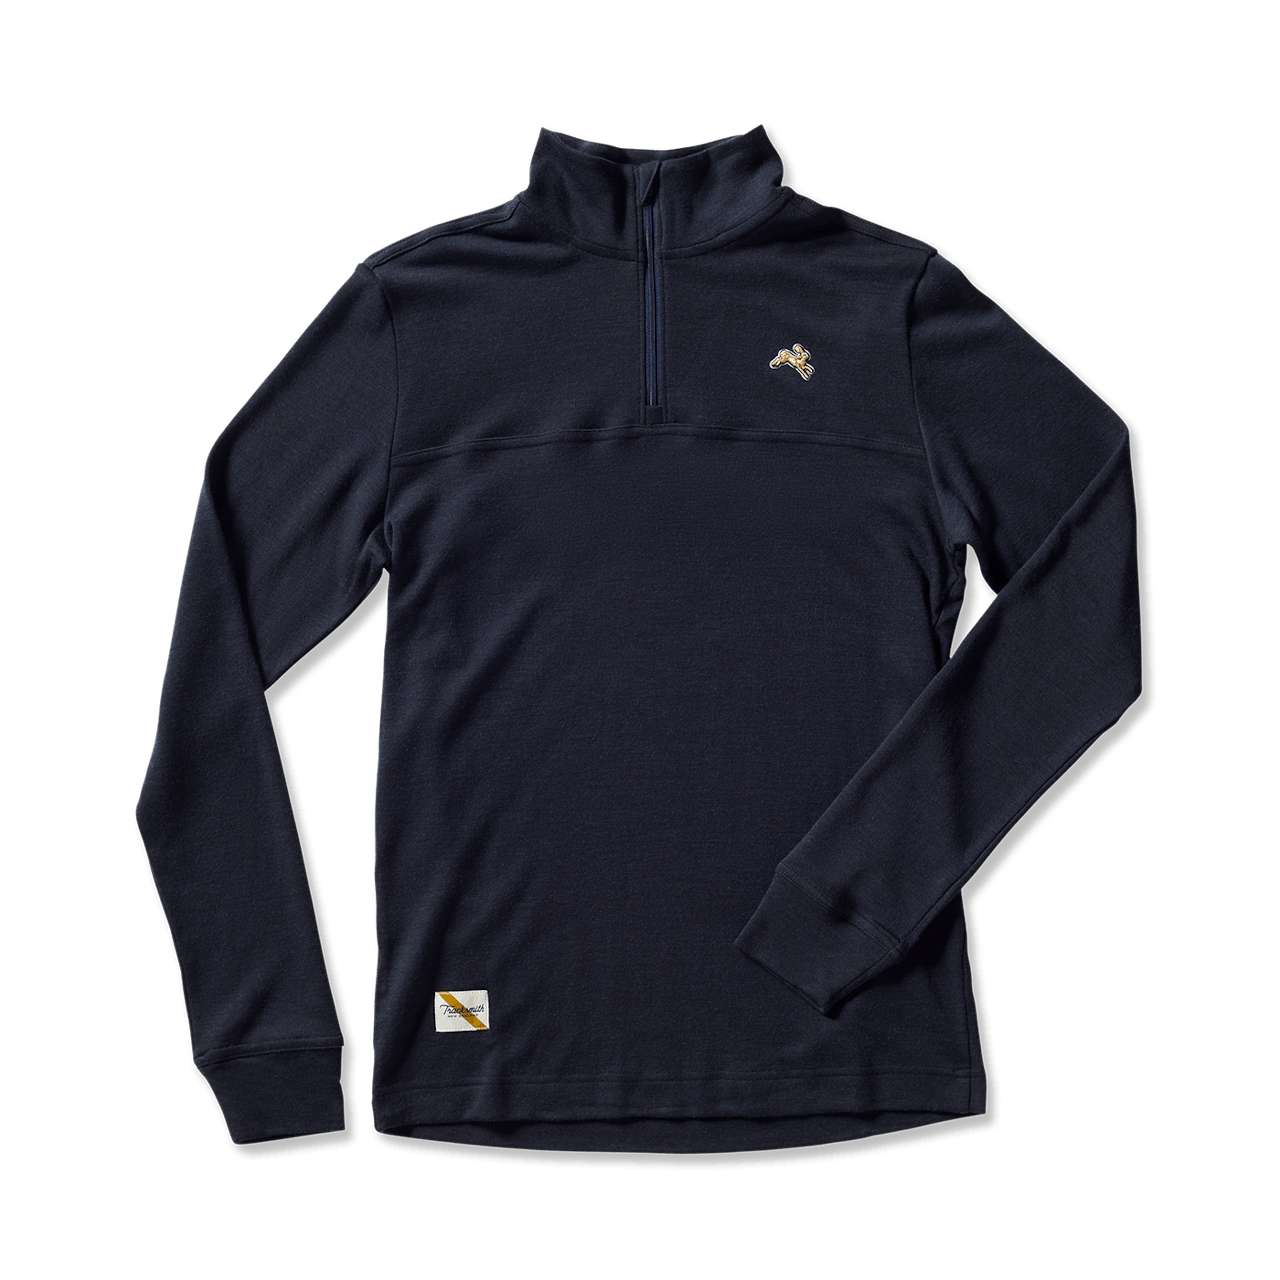 https://tracksmith-media.imgix.net/Fall20-Mens-Downeaster-Navy.png?auto=format,compress&crop=faces&dpr=2&fit=crop&h=640&w=640